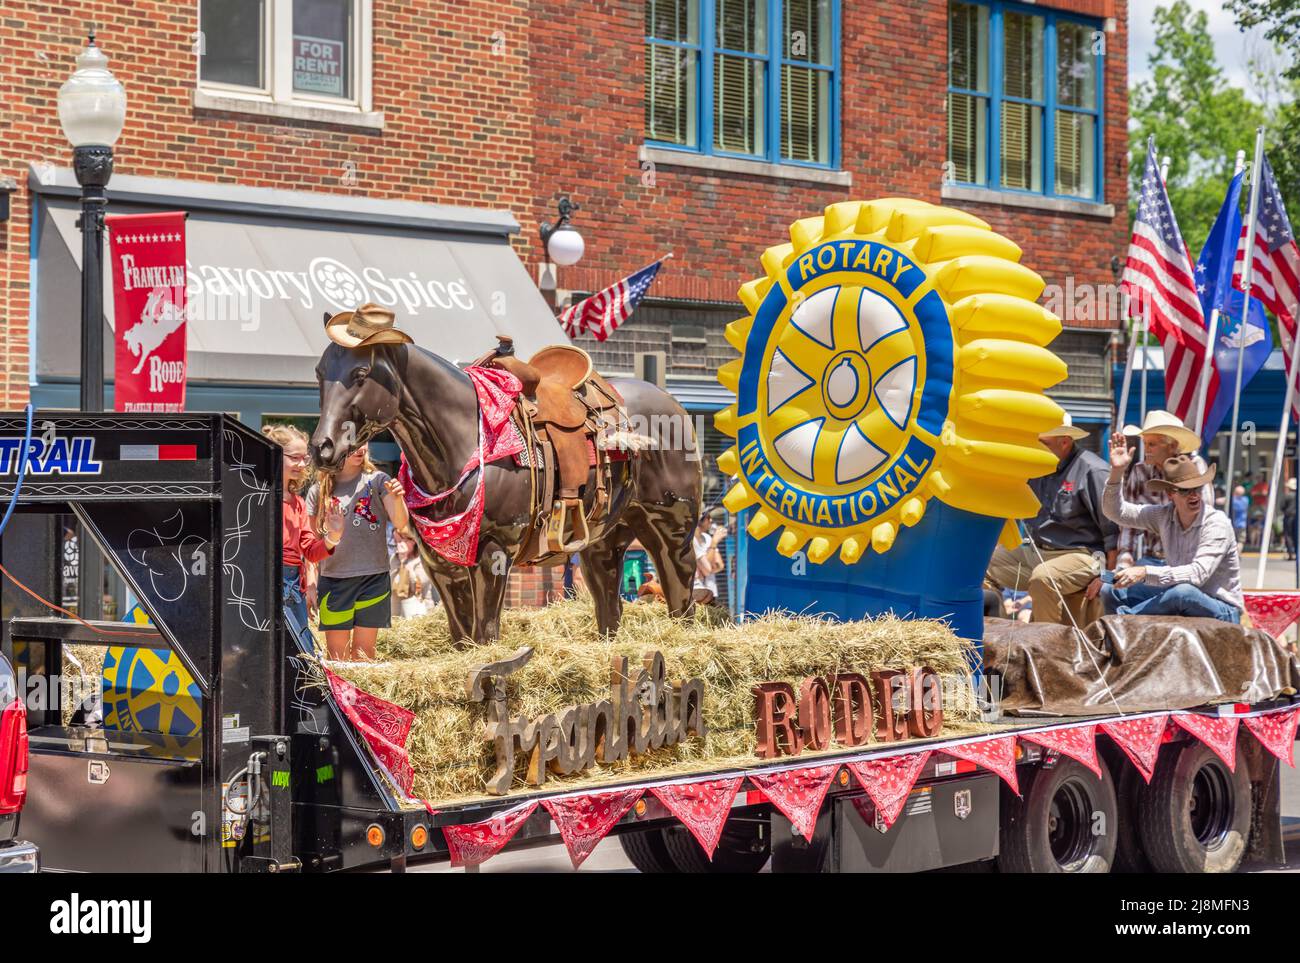 Rotary International parade float in the franklin rodeo parade Stock Photo